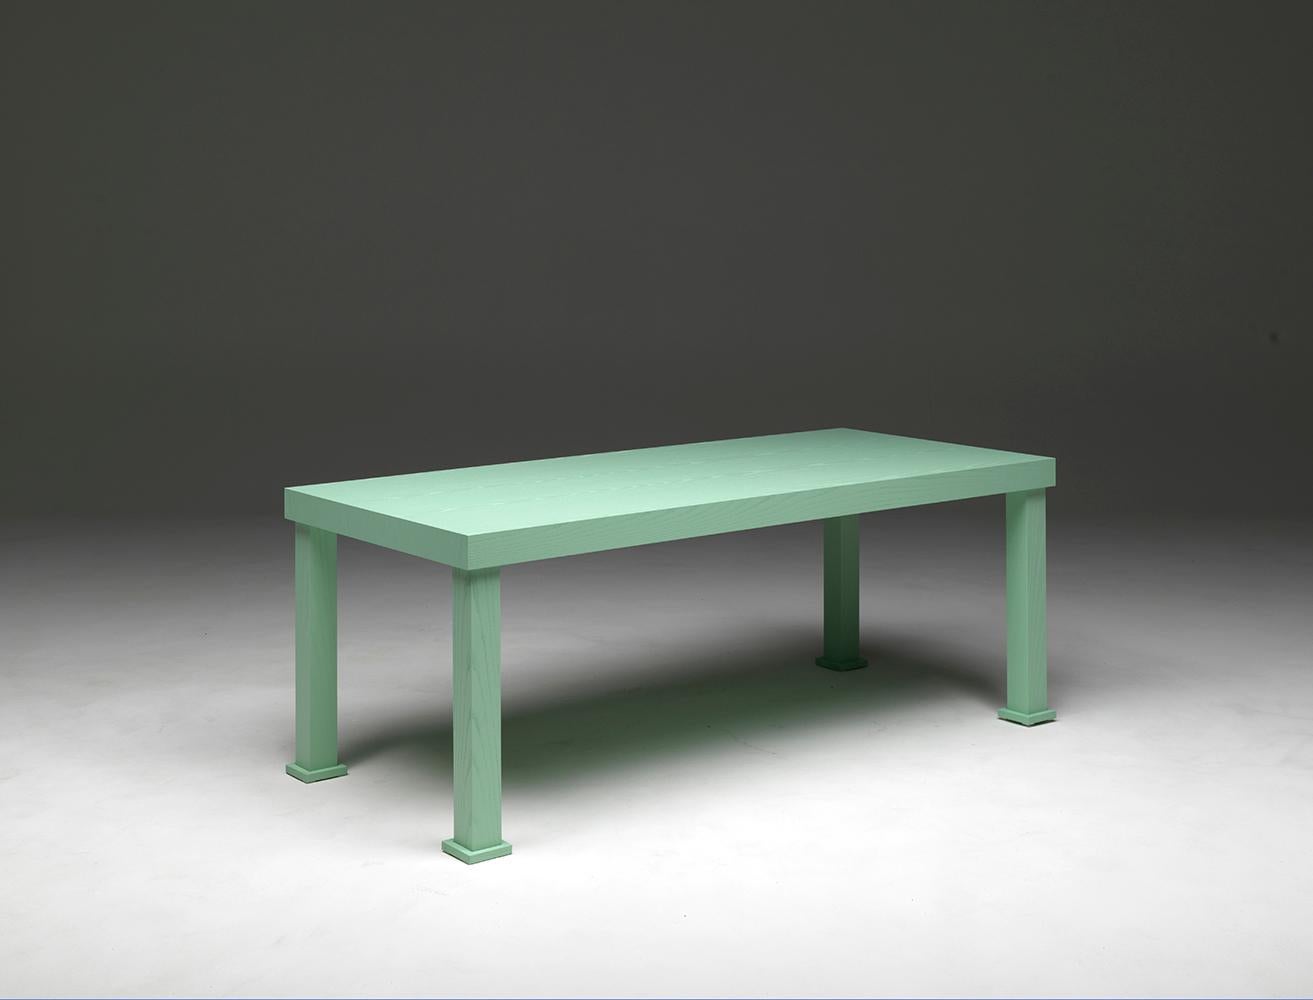 Universal Living, rectangular dining table in open-pore lacquered ash wood, marine green color, with square section legs. Designed by Aldo Cibic.
A table with a strong yet not exaggerated personality, with warm and pleasant functionality,
easy to